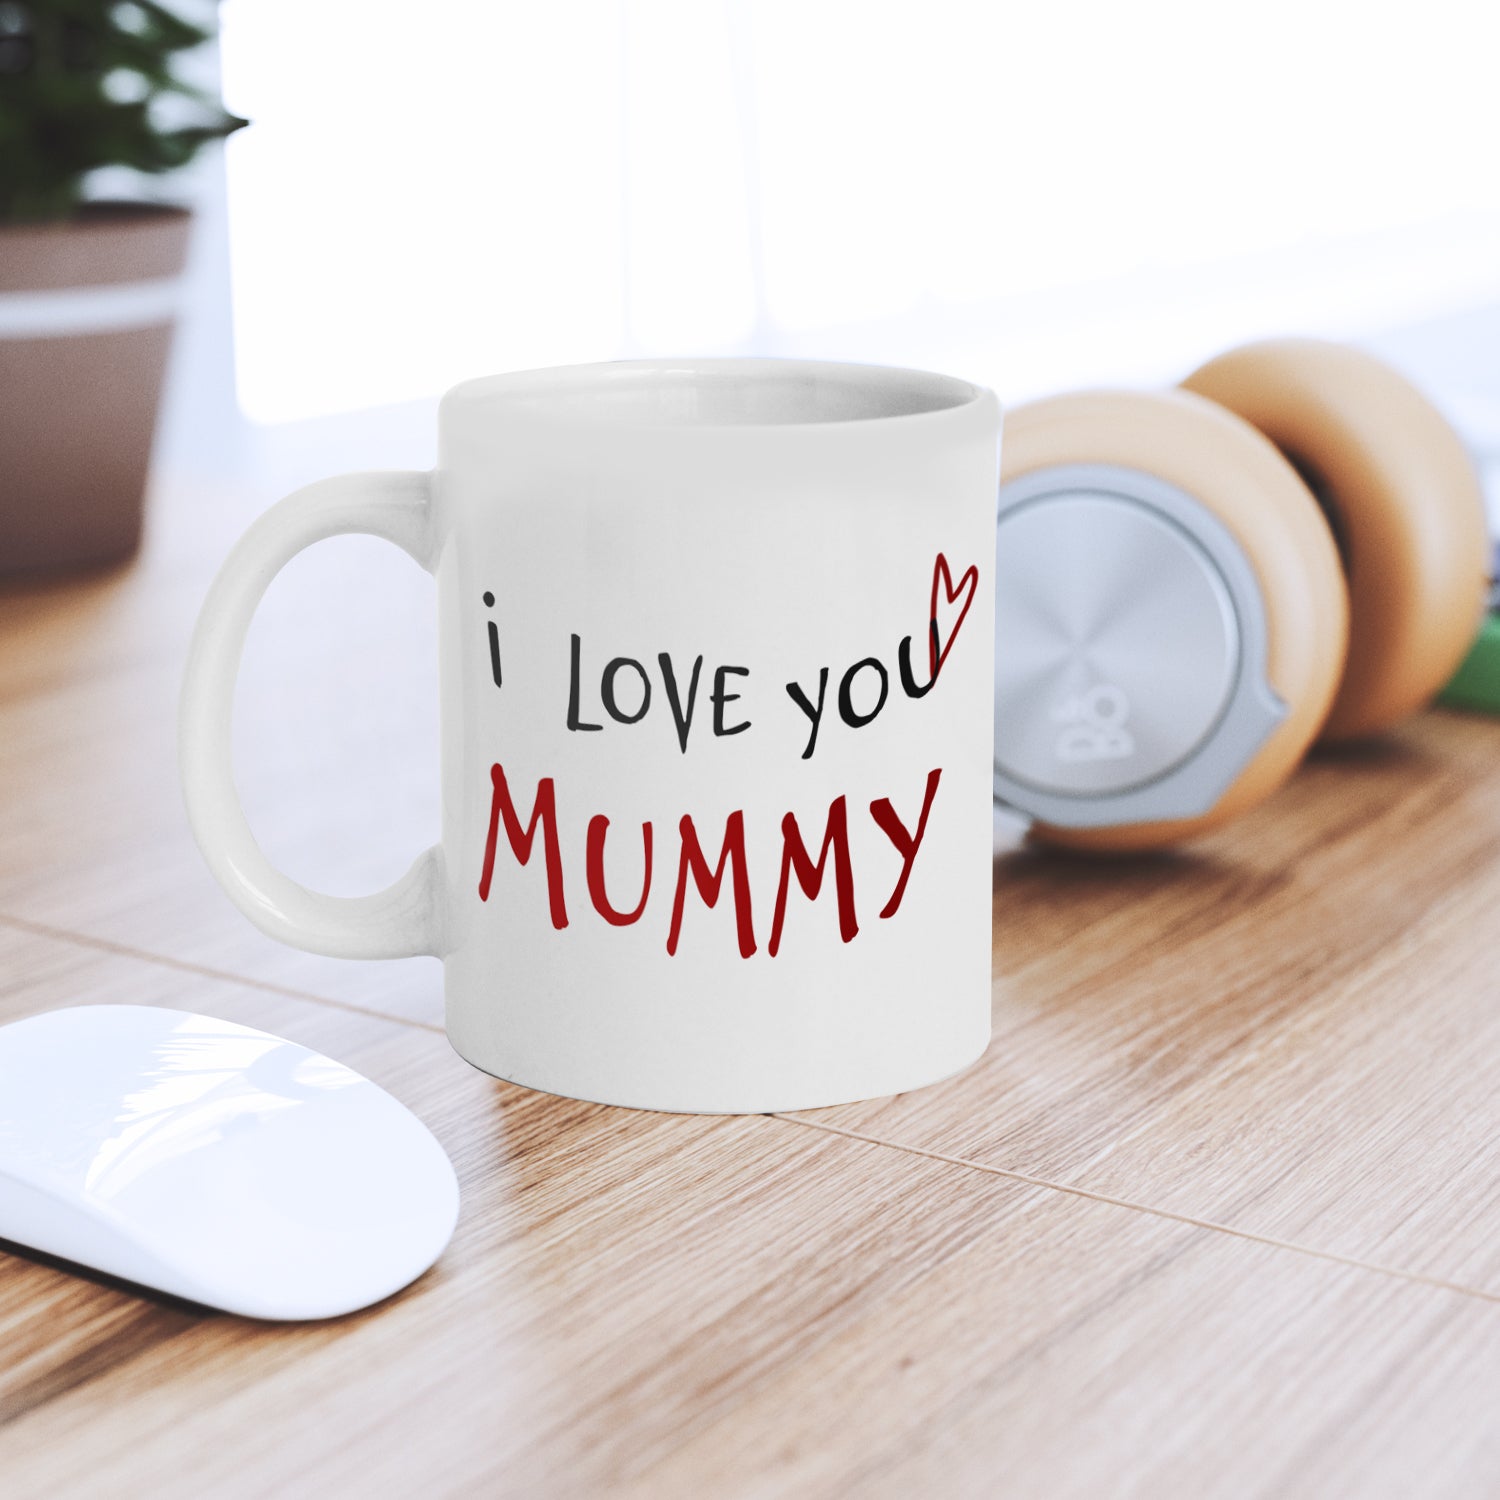 "I Love you Mommy" Mother's Day theme Ceramic Coffee Mugs